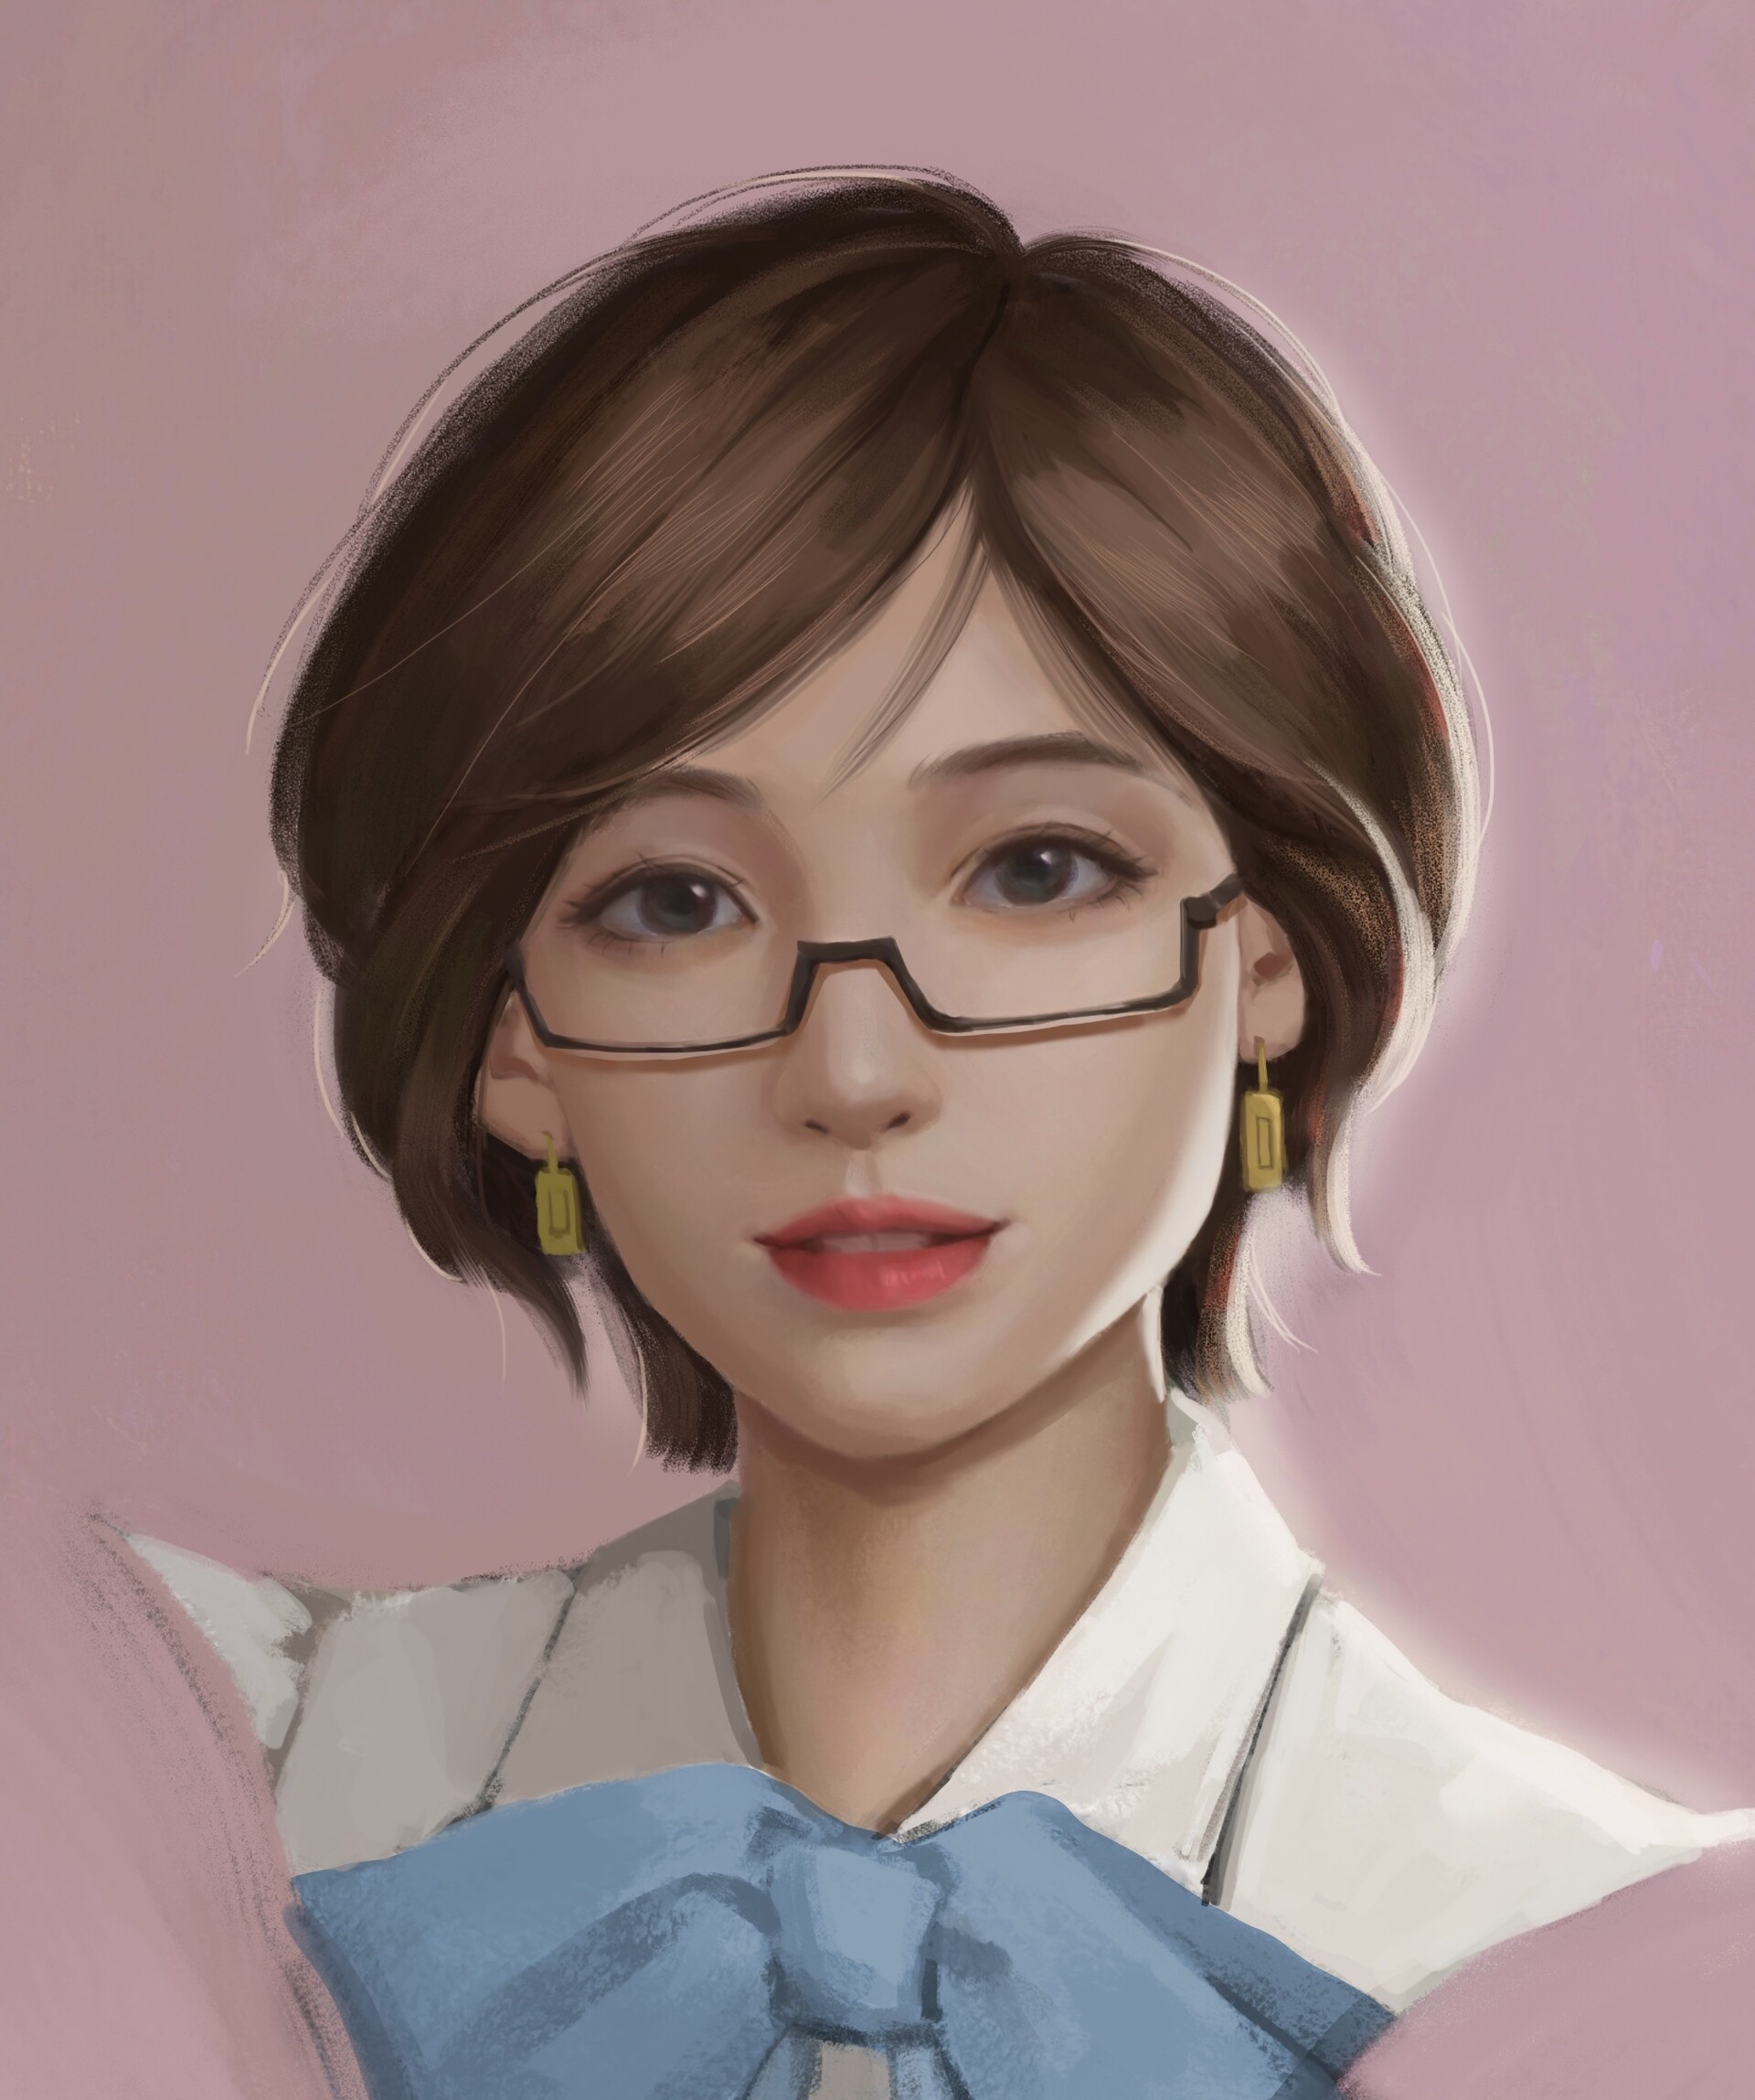 ArtStation - 戴眼镜的姐姐 the beauty with glasses